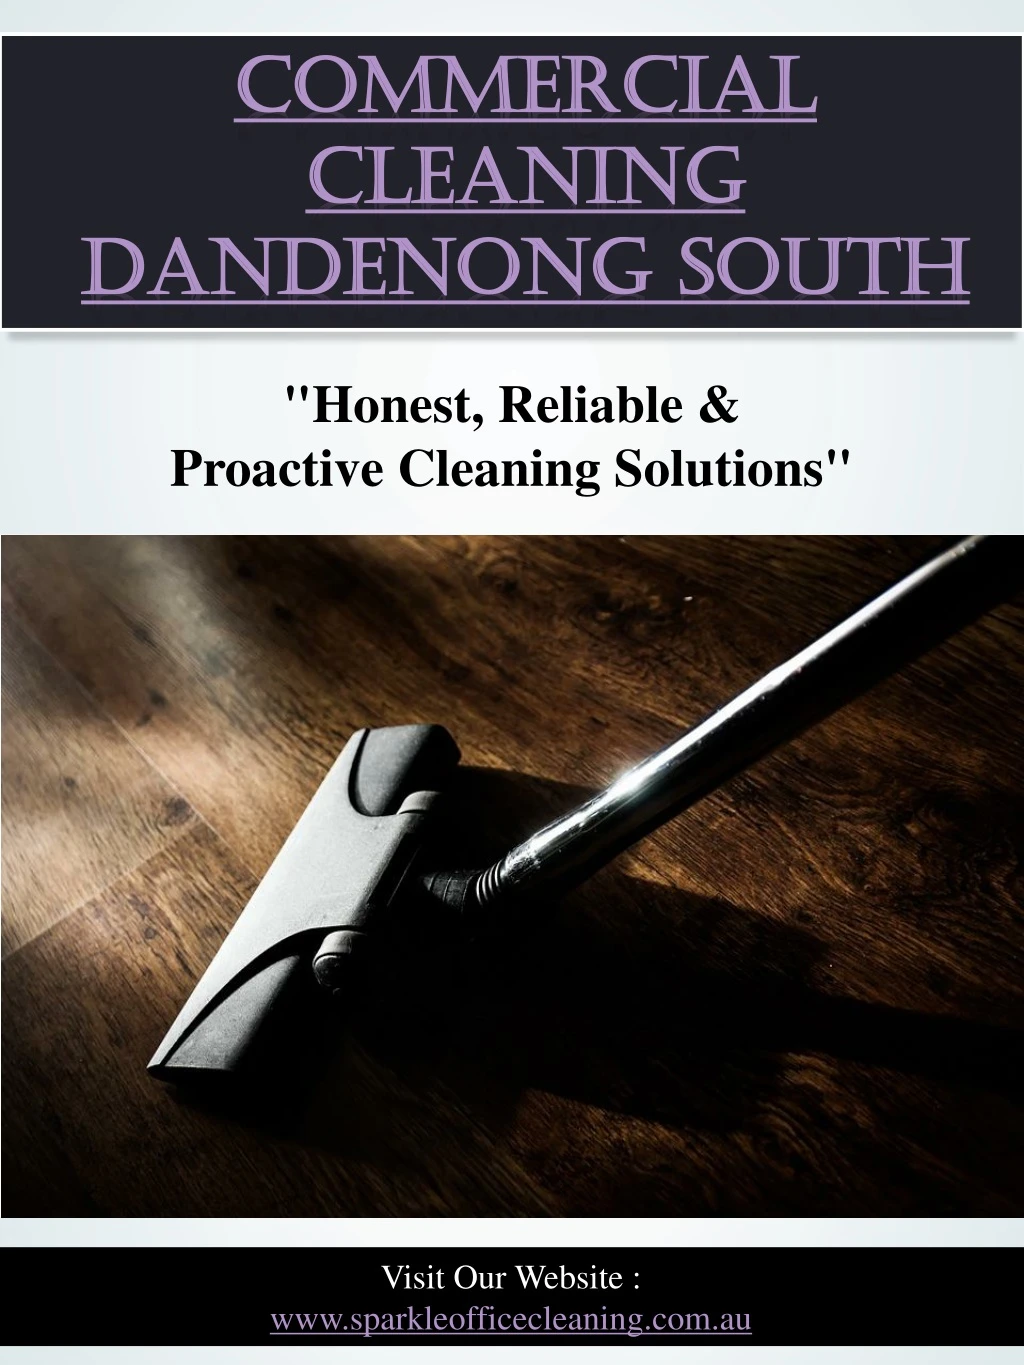 commercial commercial cleaning cleaning dandenong